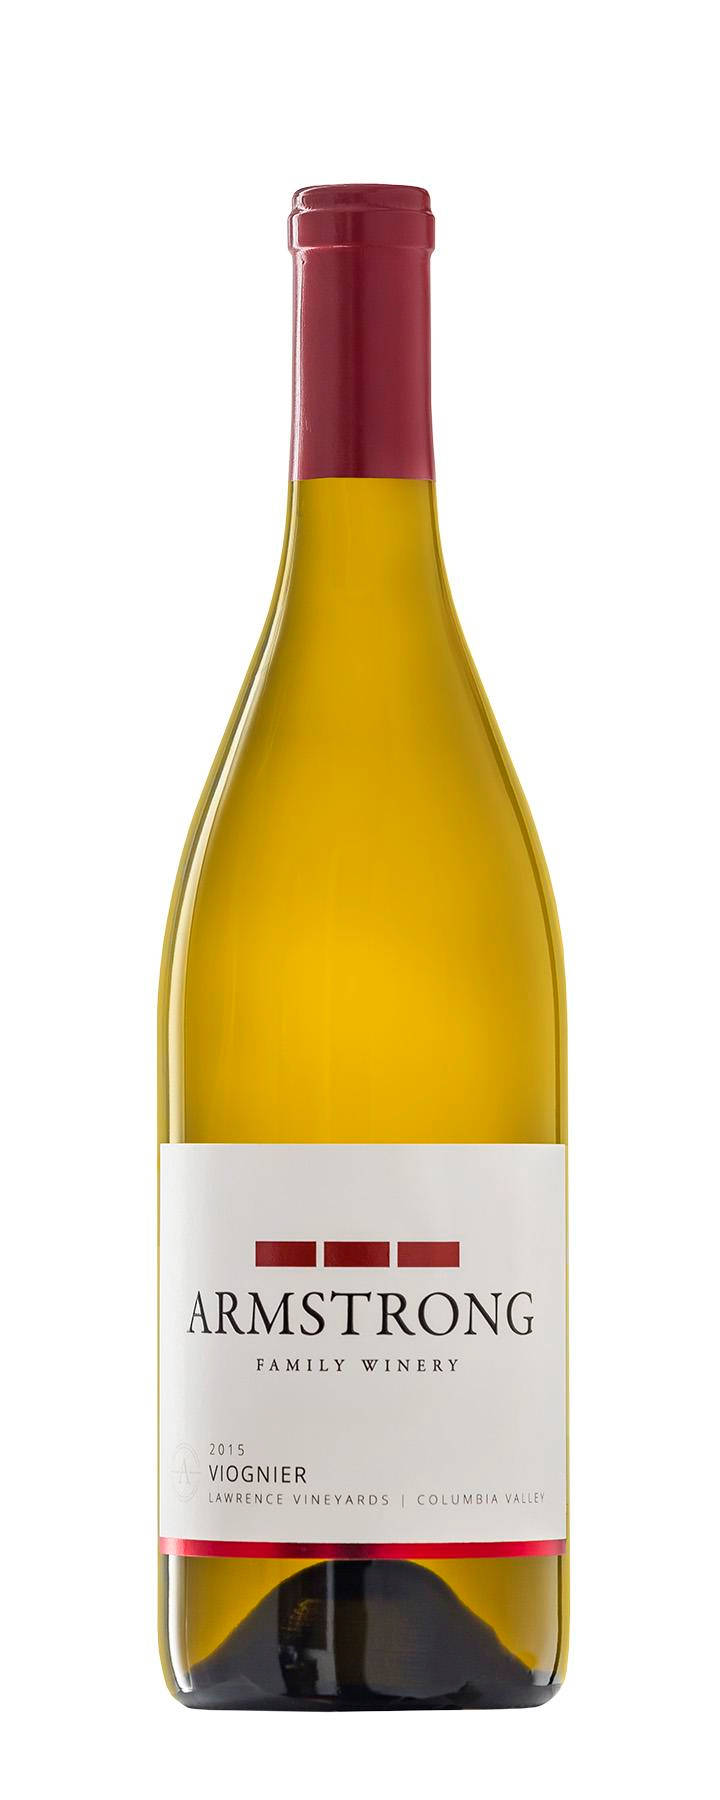 Viognier continues to seduce winemakers